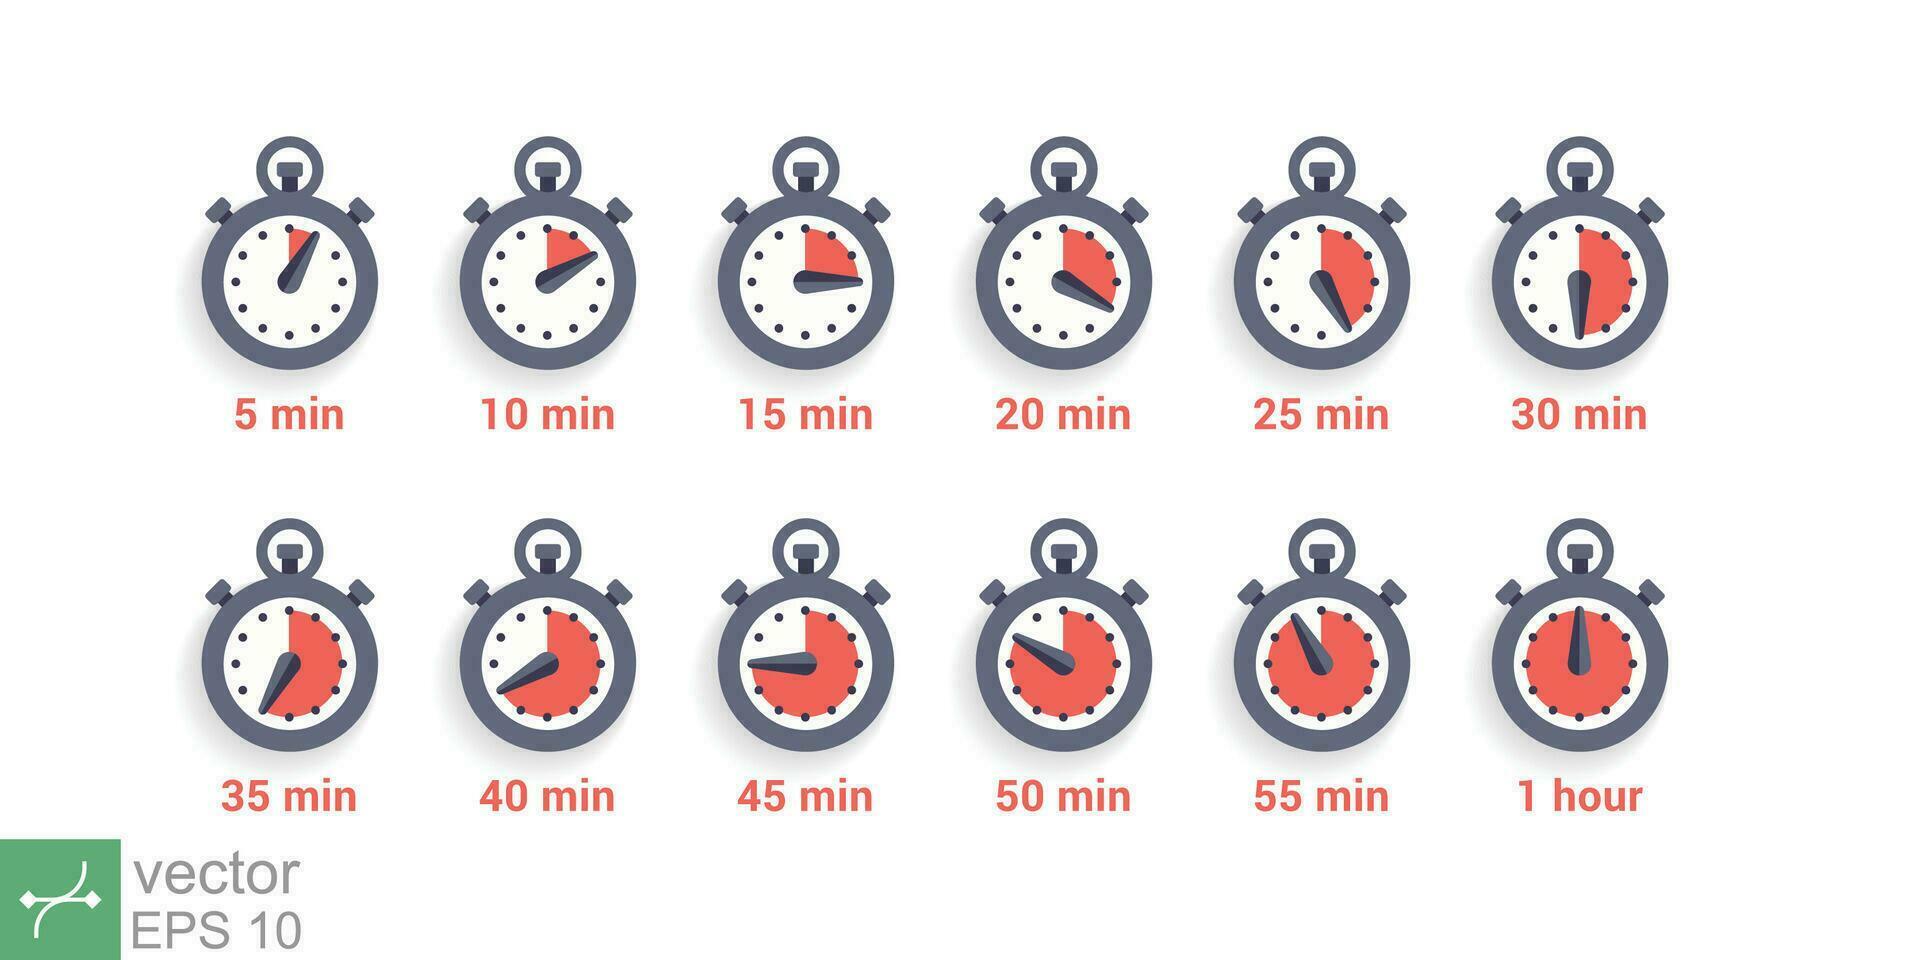 Timer, clock, stopwatch icon set. Simple flat style. Stop watch, label cooking time, chronometer, countdown concept. Vector illustration isolated on white background. EPS 10.